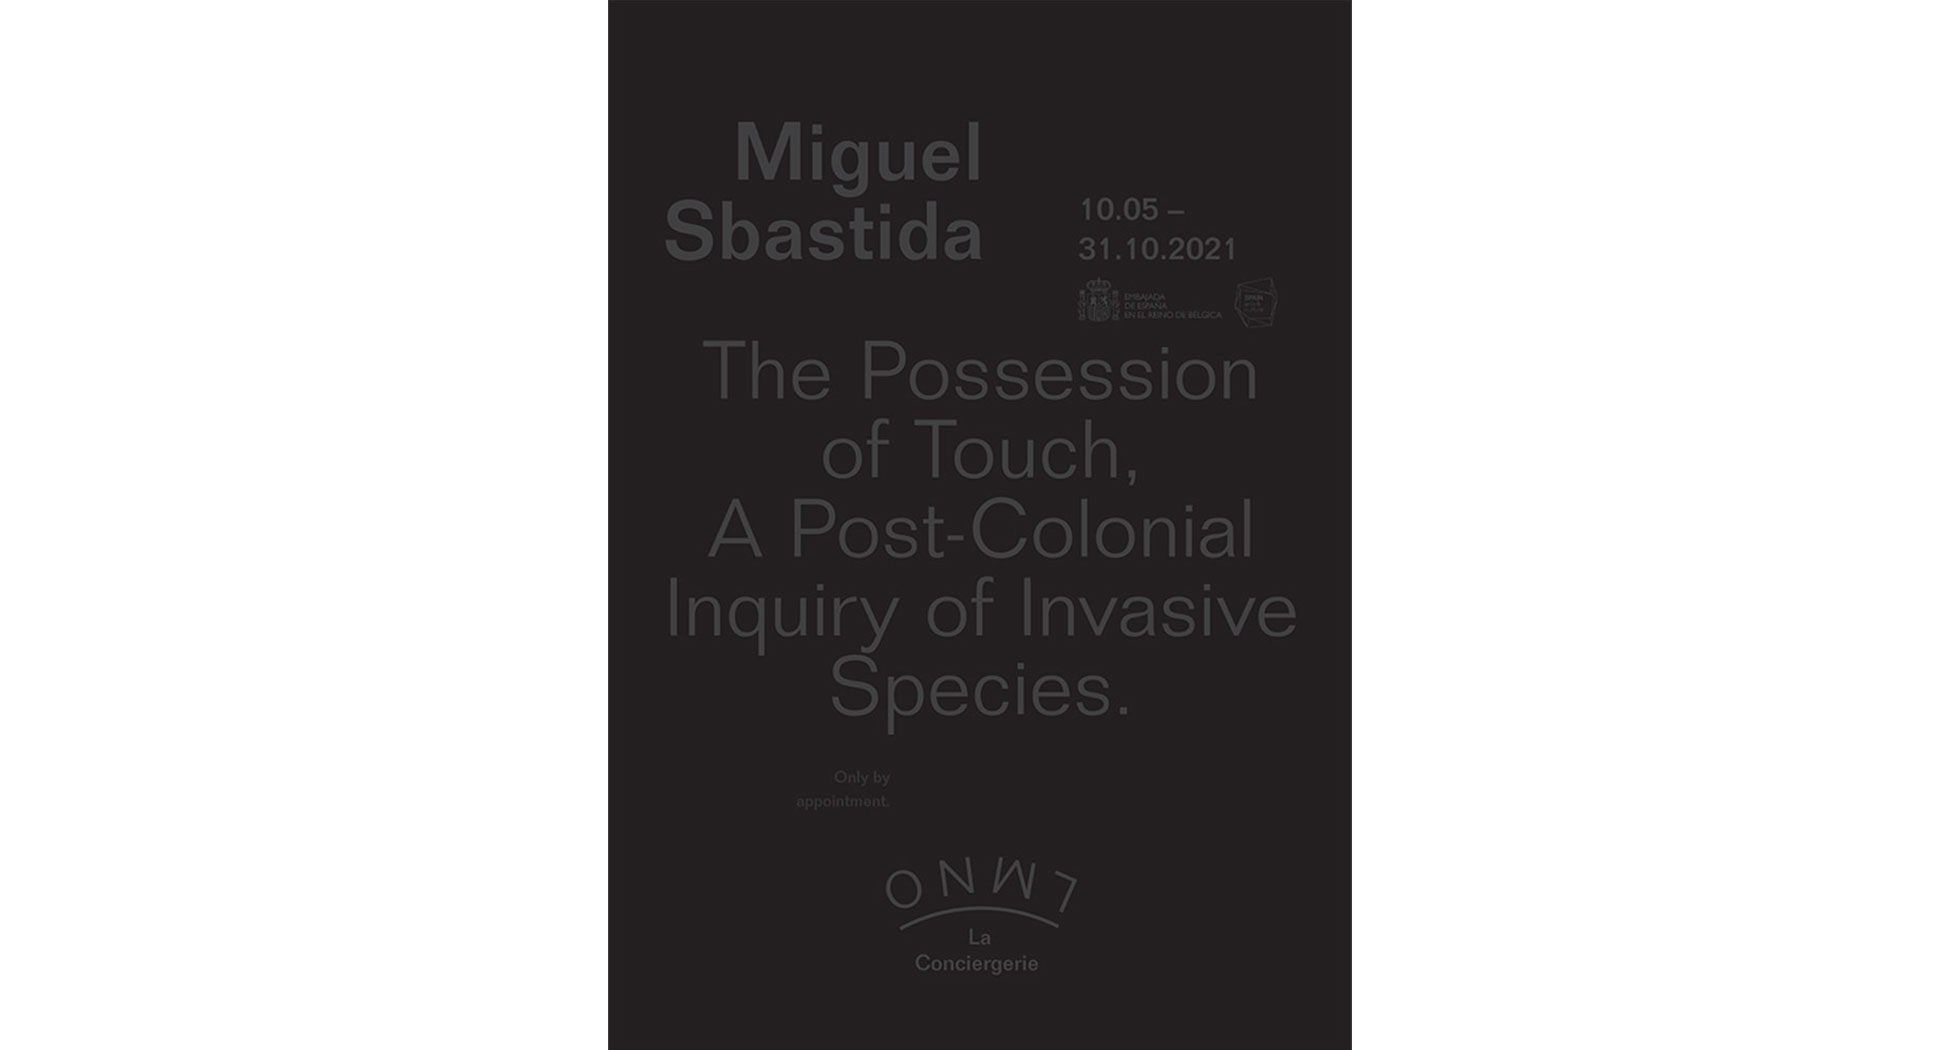 The possession of Touch, A post-colonial inquiry of invasive species